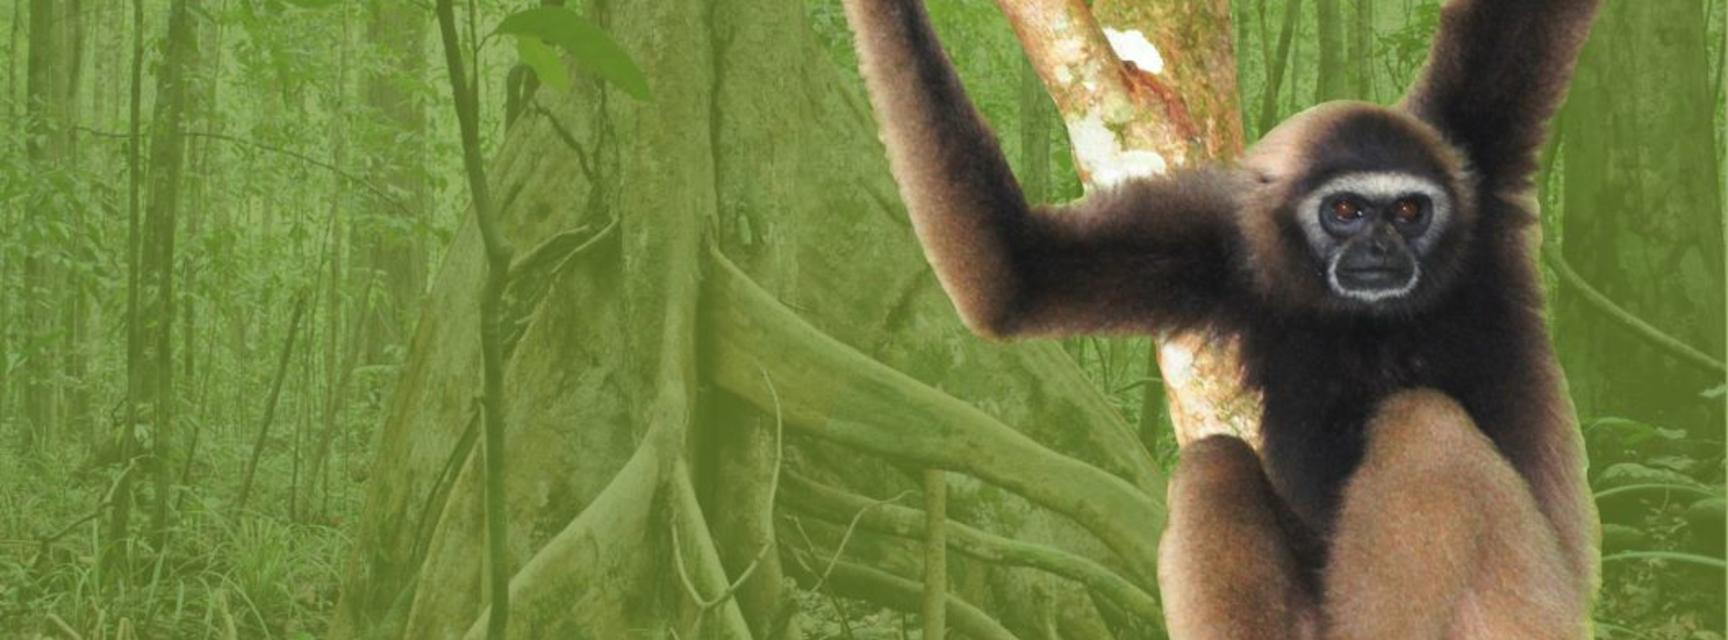 A gibbon in a swamp peat forest in Borneo